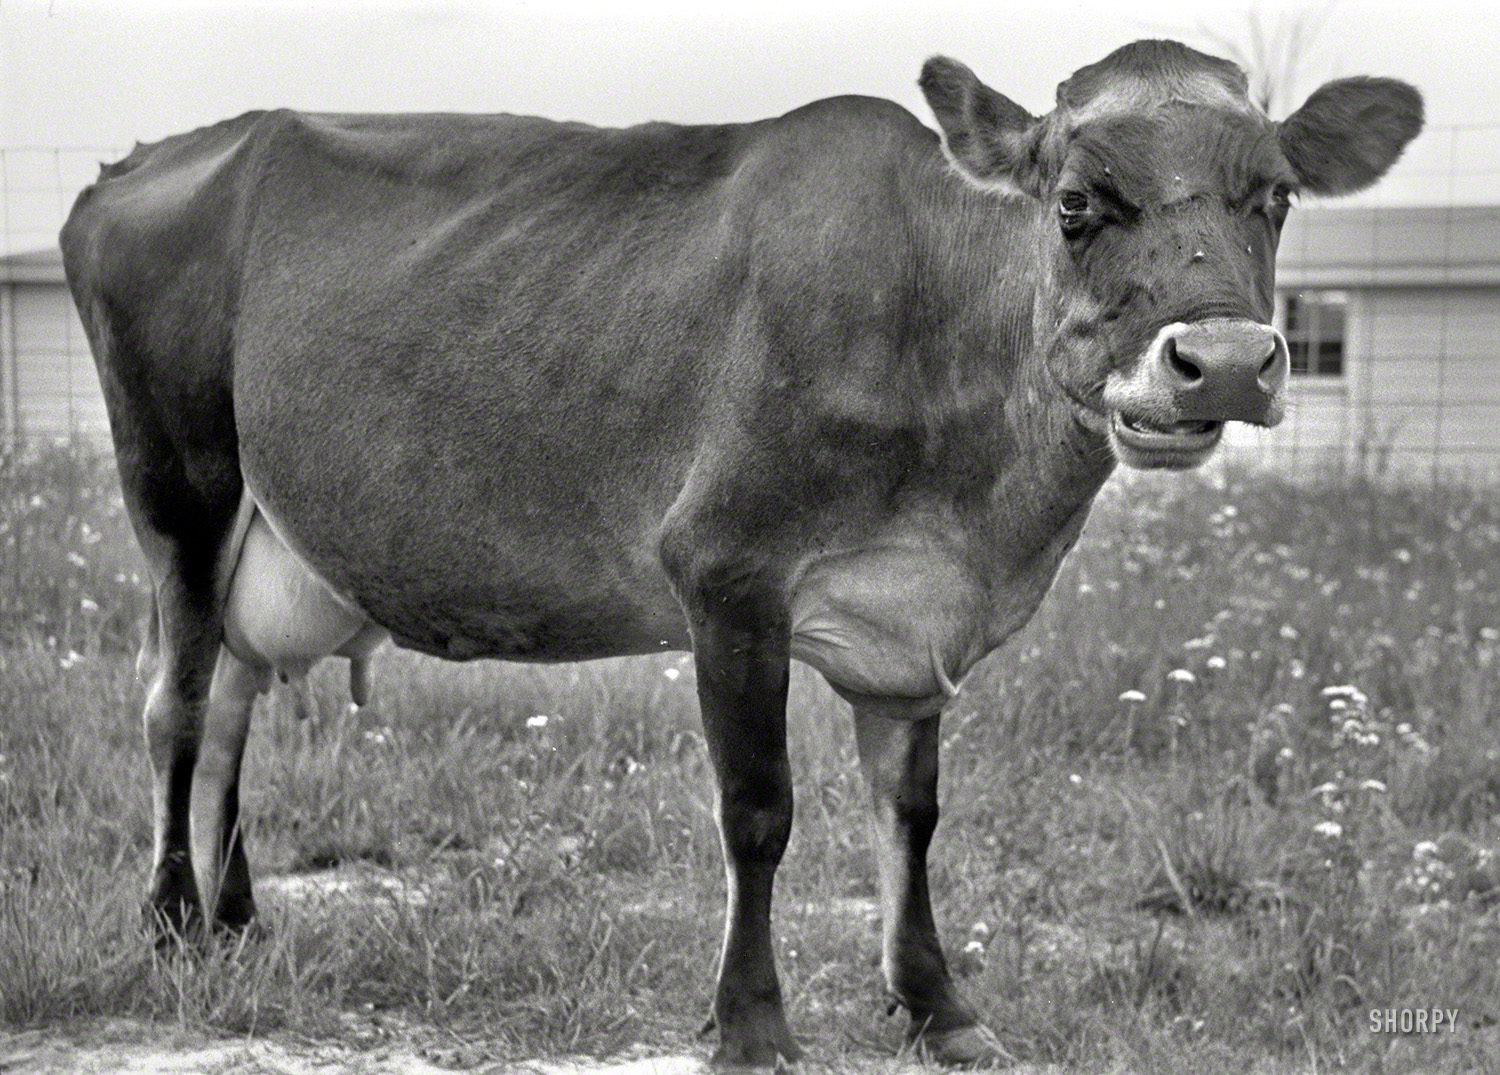 May 1938. "Cow at Wabash Farms cooperative, Indiana." Photo by Arthur Rothstein for the Farm Security Administration. View full size.